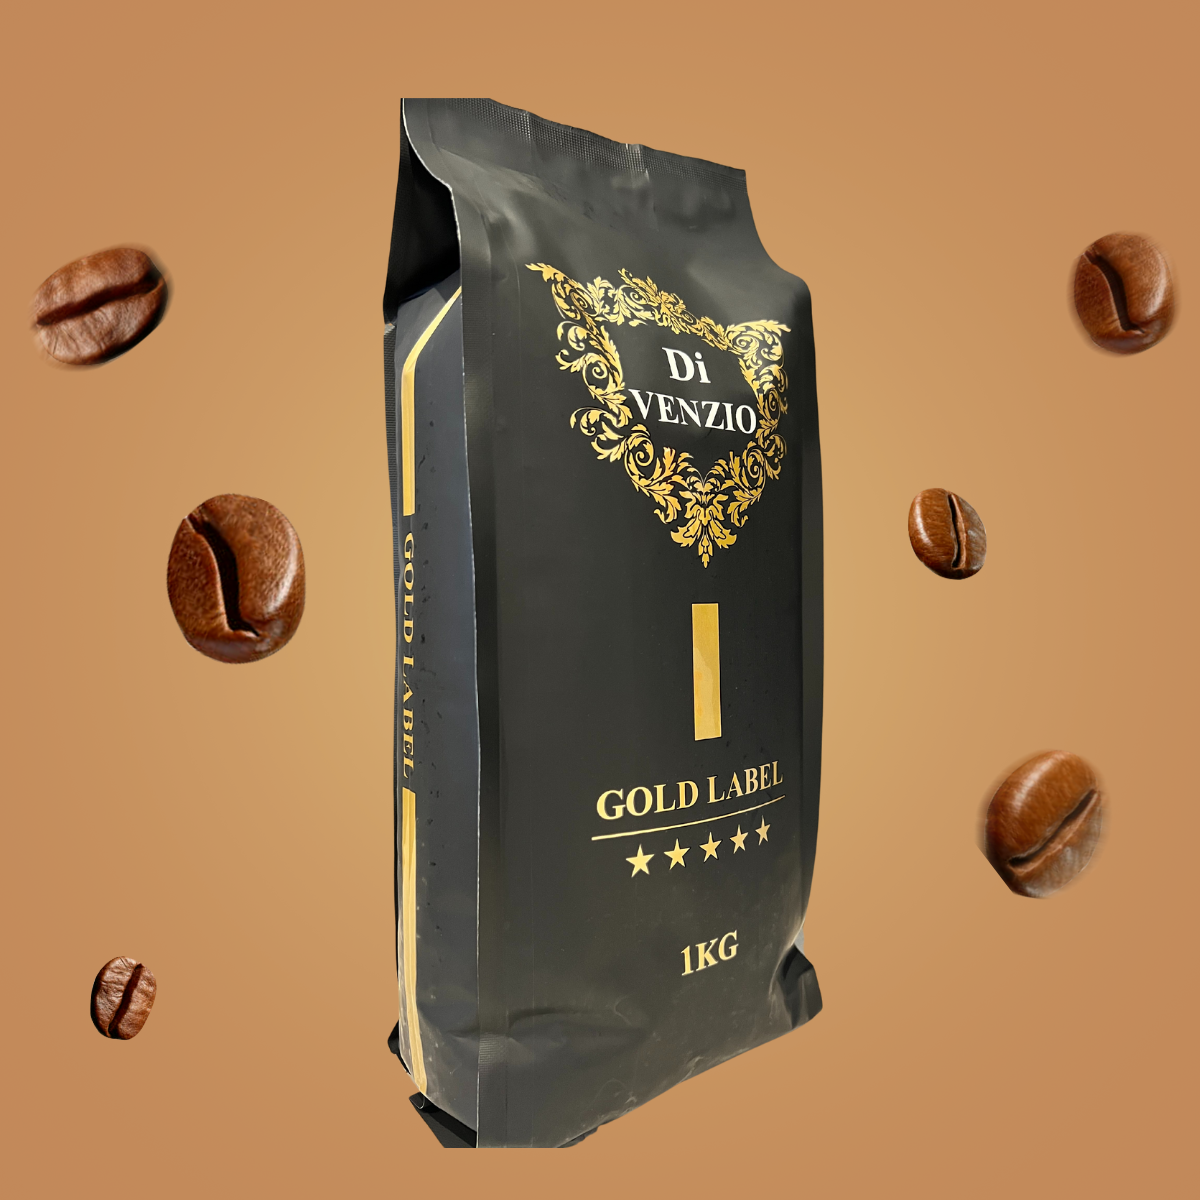 1kg Gold Label coffee